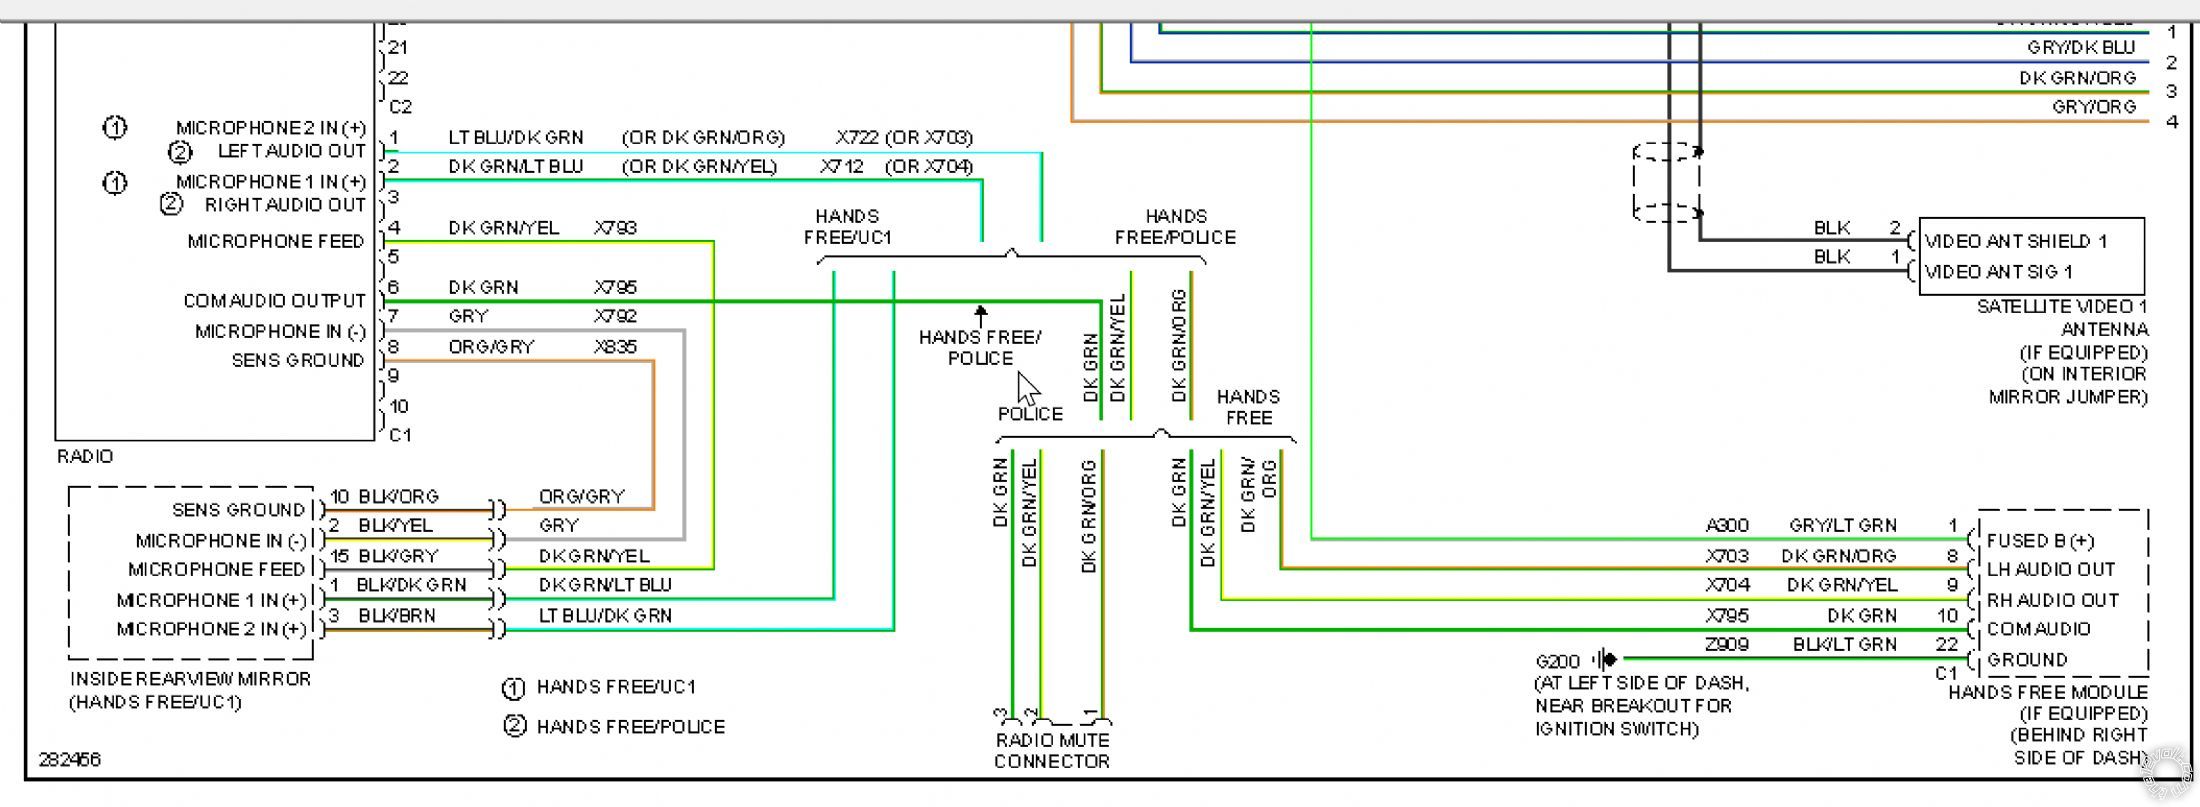 2010 Dodge Charger Stereo Wiring Diagram Schematic Wiring Diagram